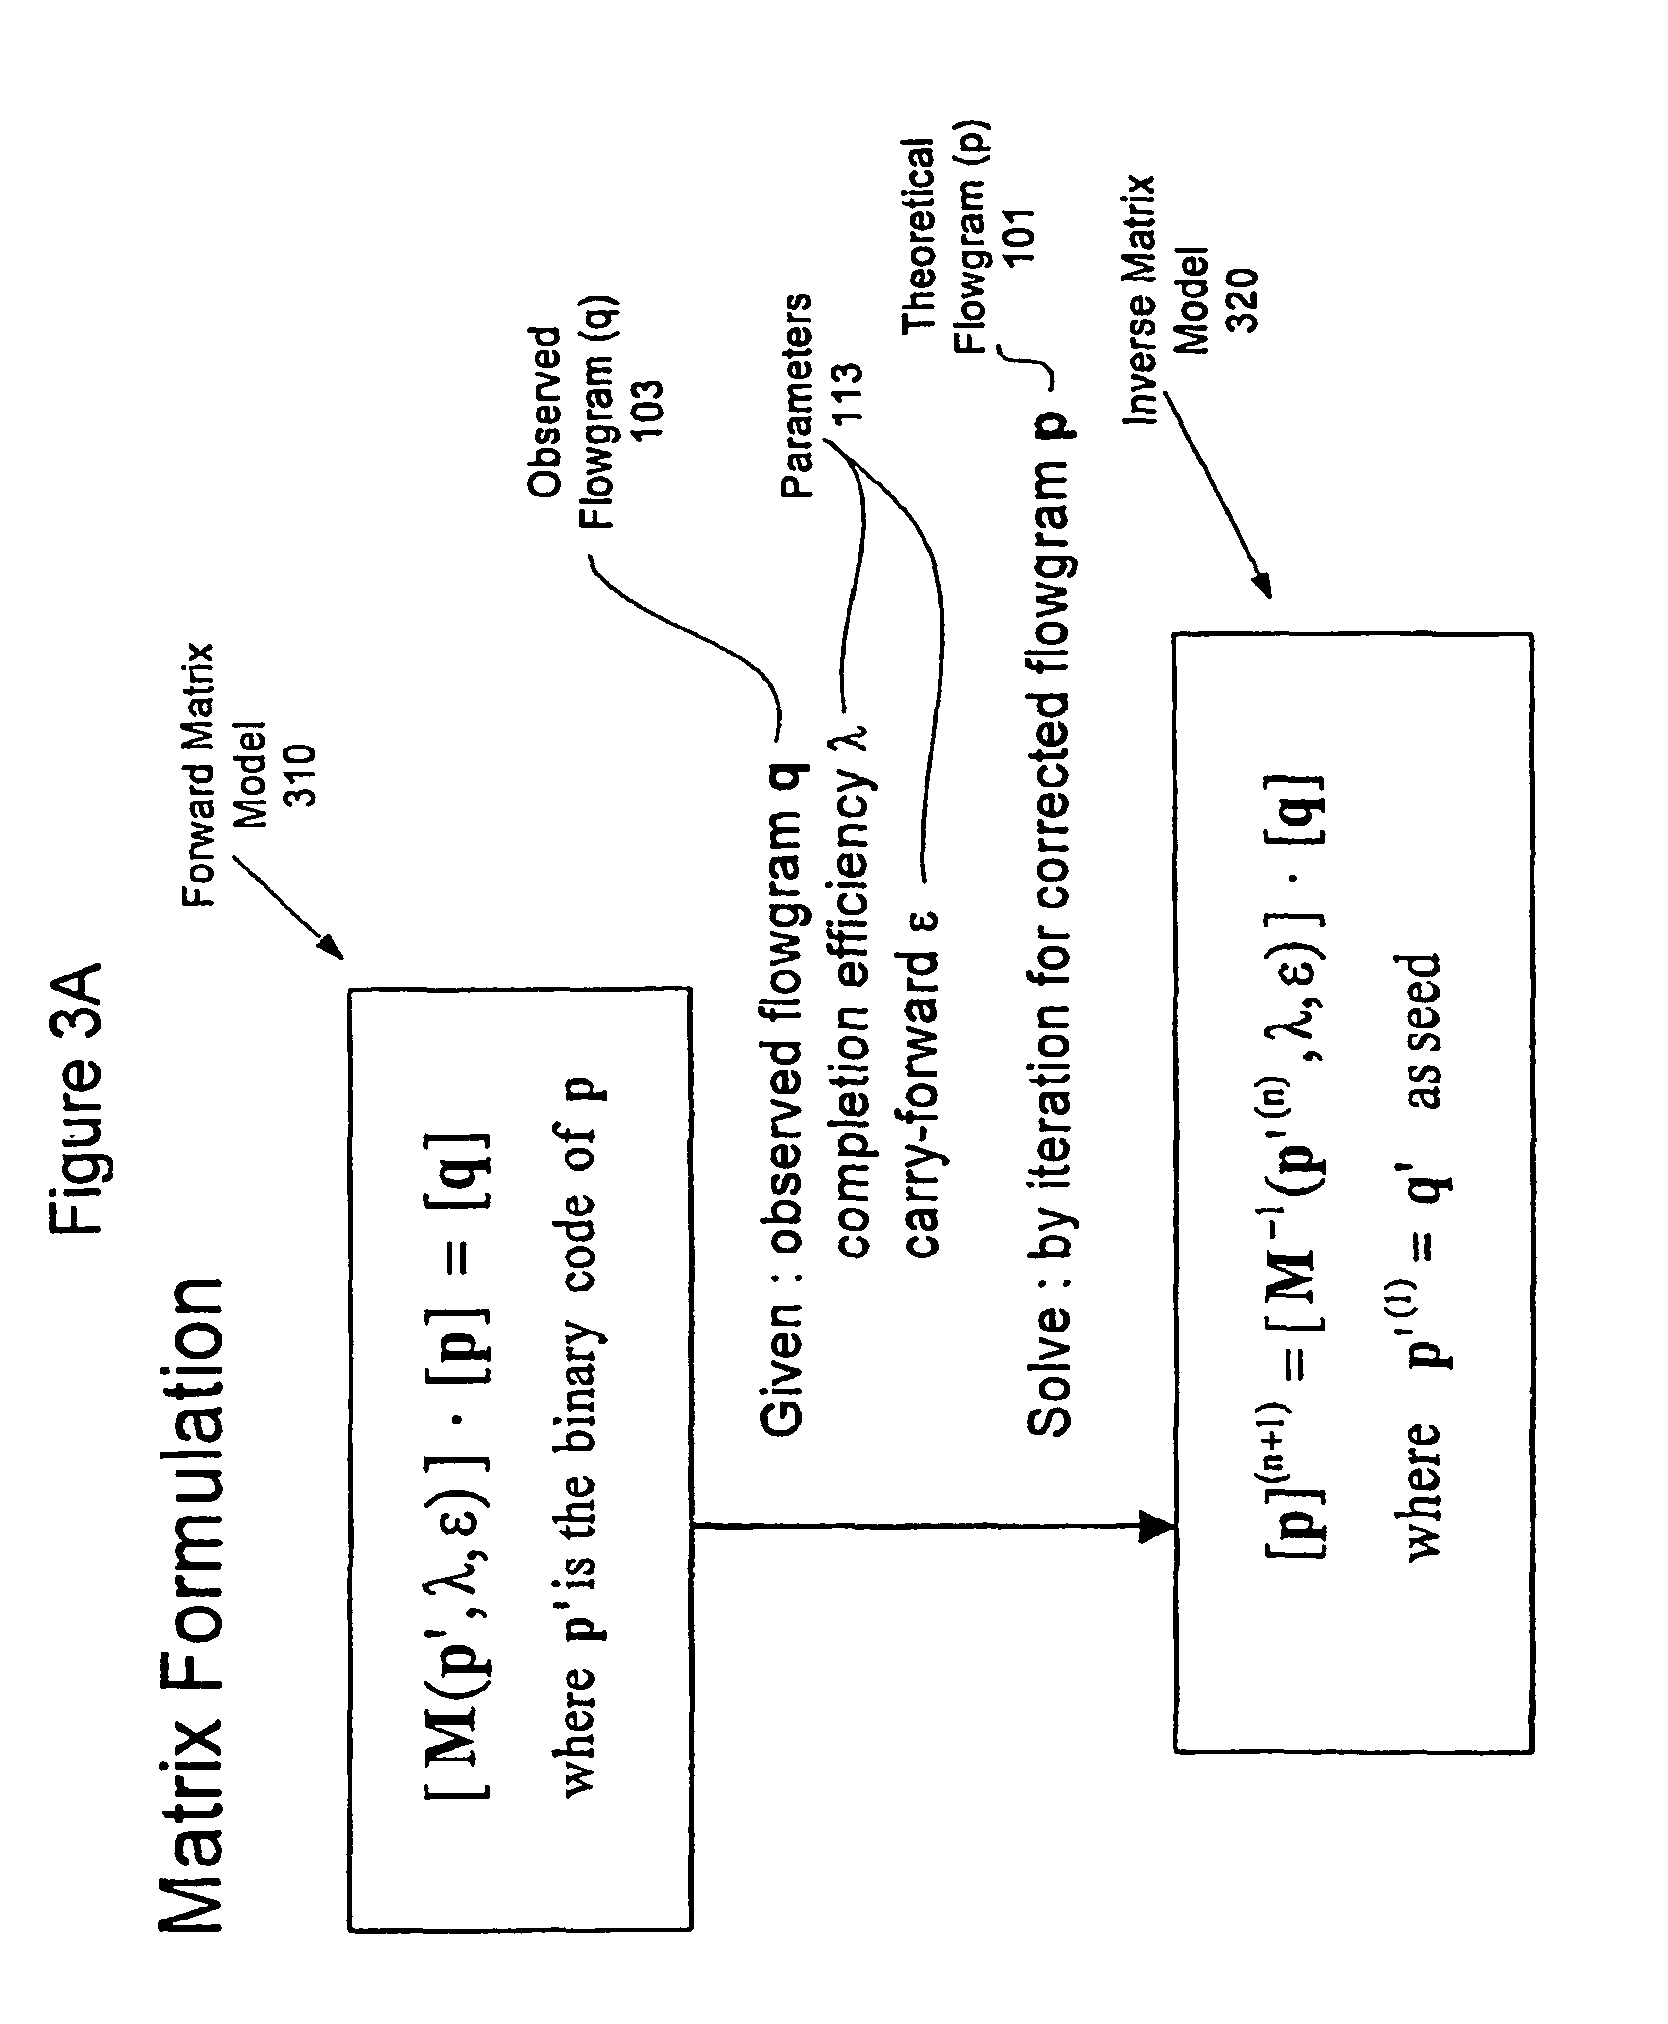 System and method for correcting primer extension errors in nucleic acid sequence data